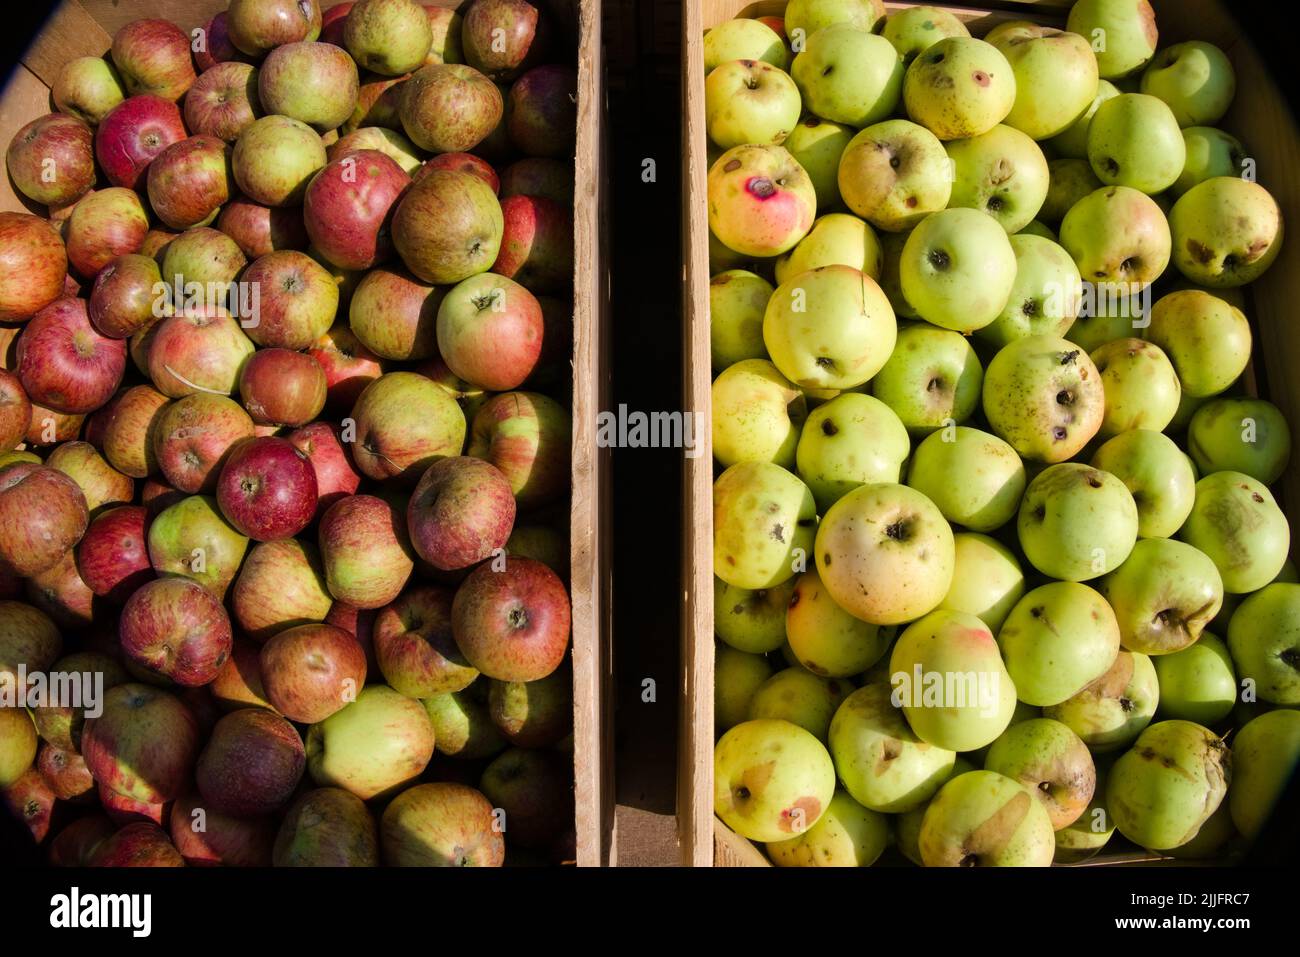 It is autumn and the harvest of coloured apples is delivered in wooden boxes Stock Photo